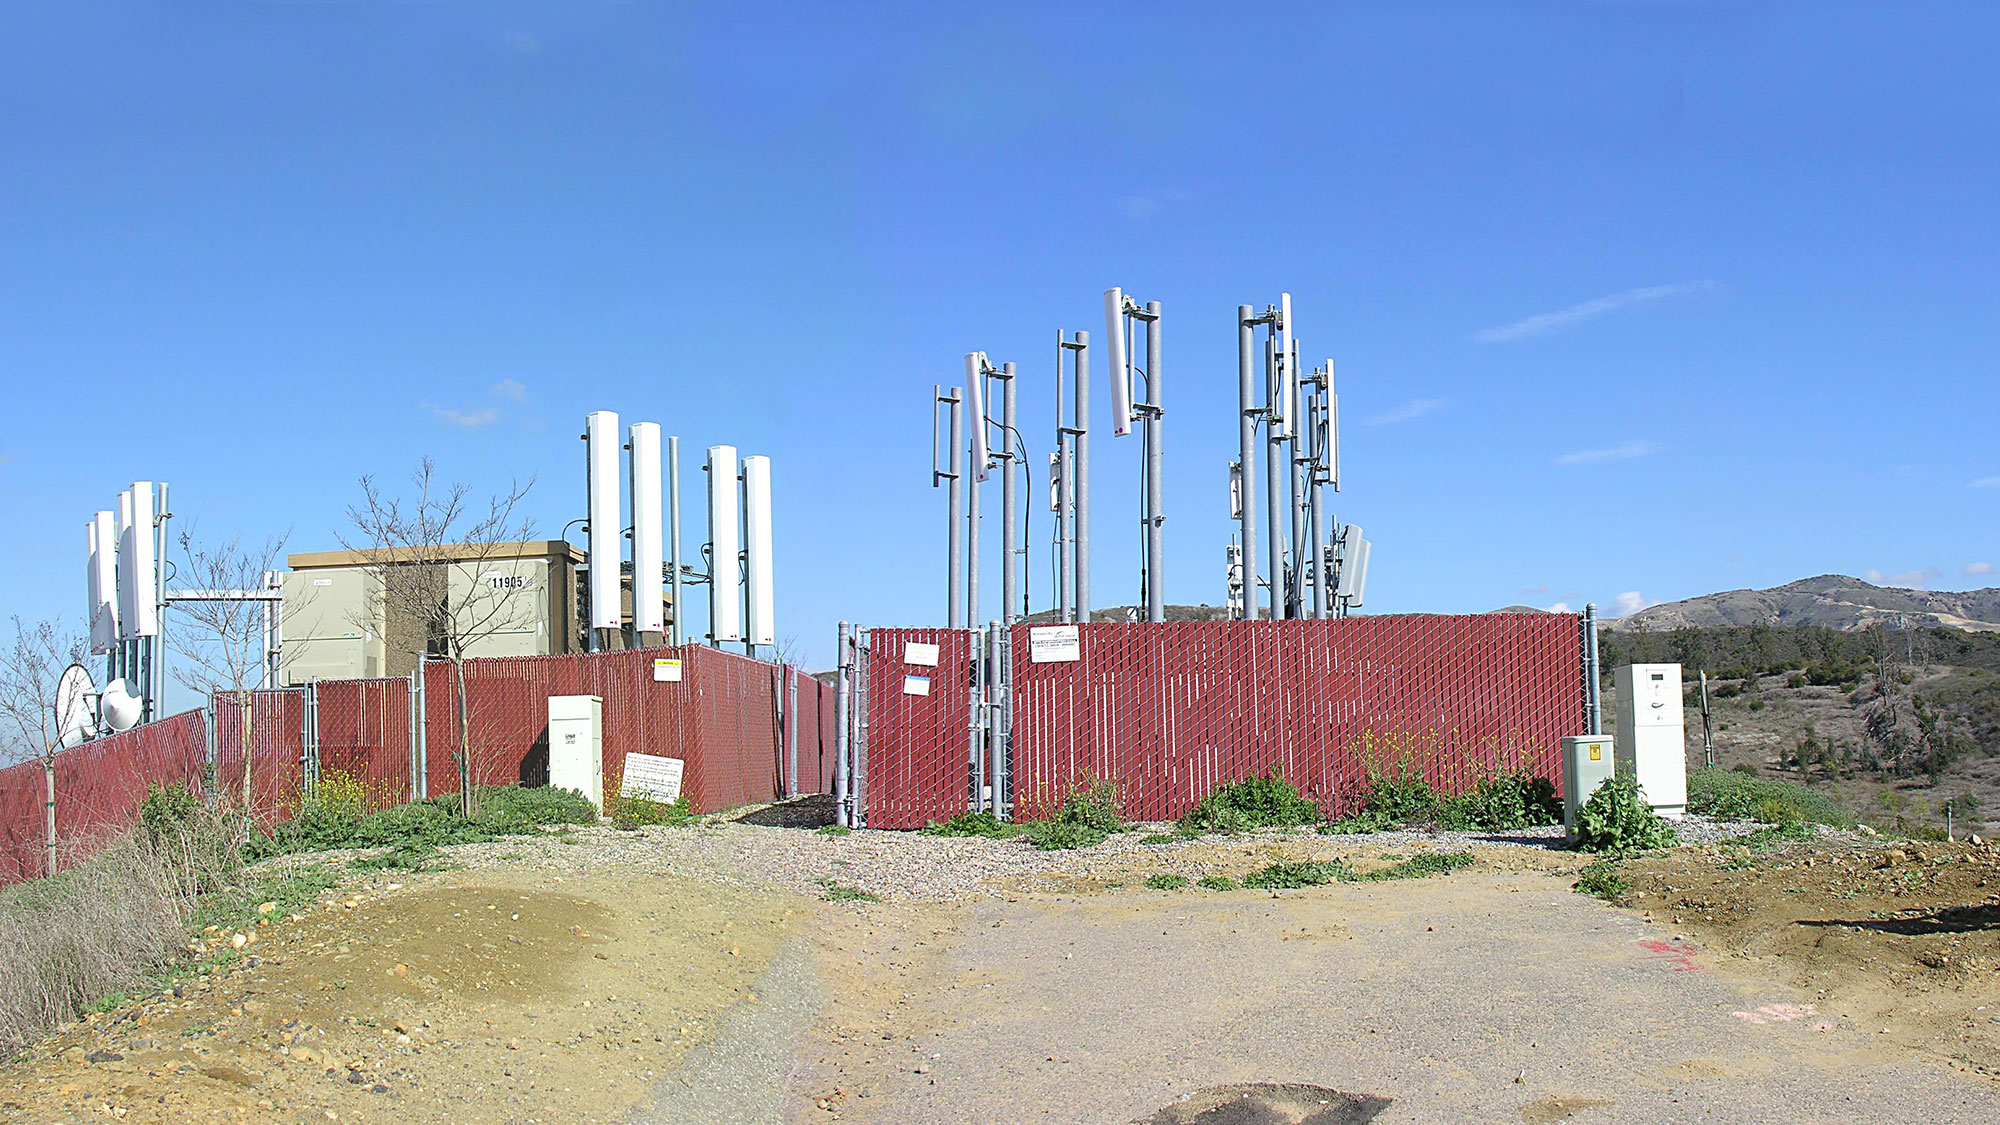 Cell Towers Behind Fence